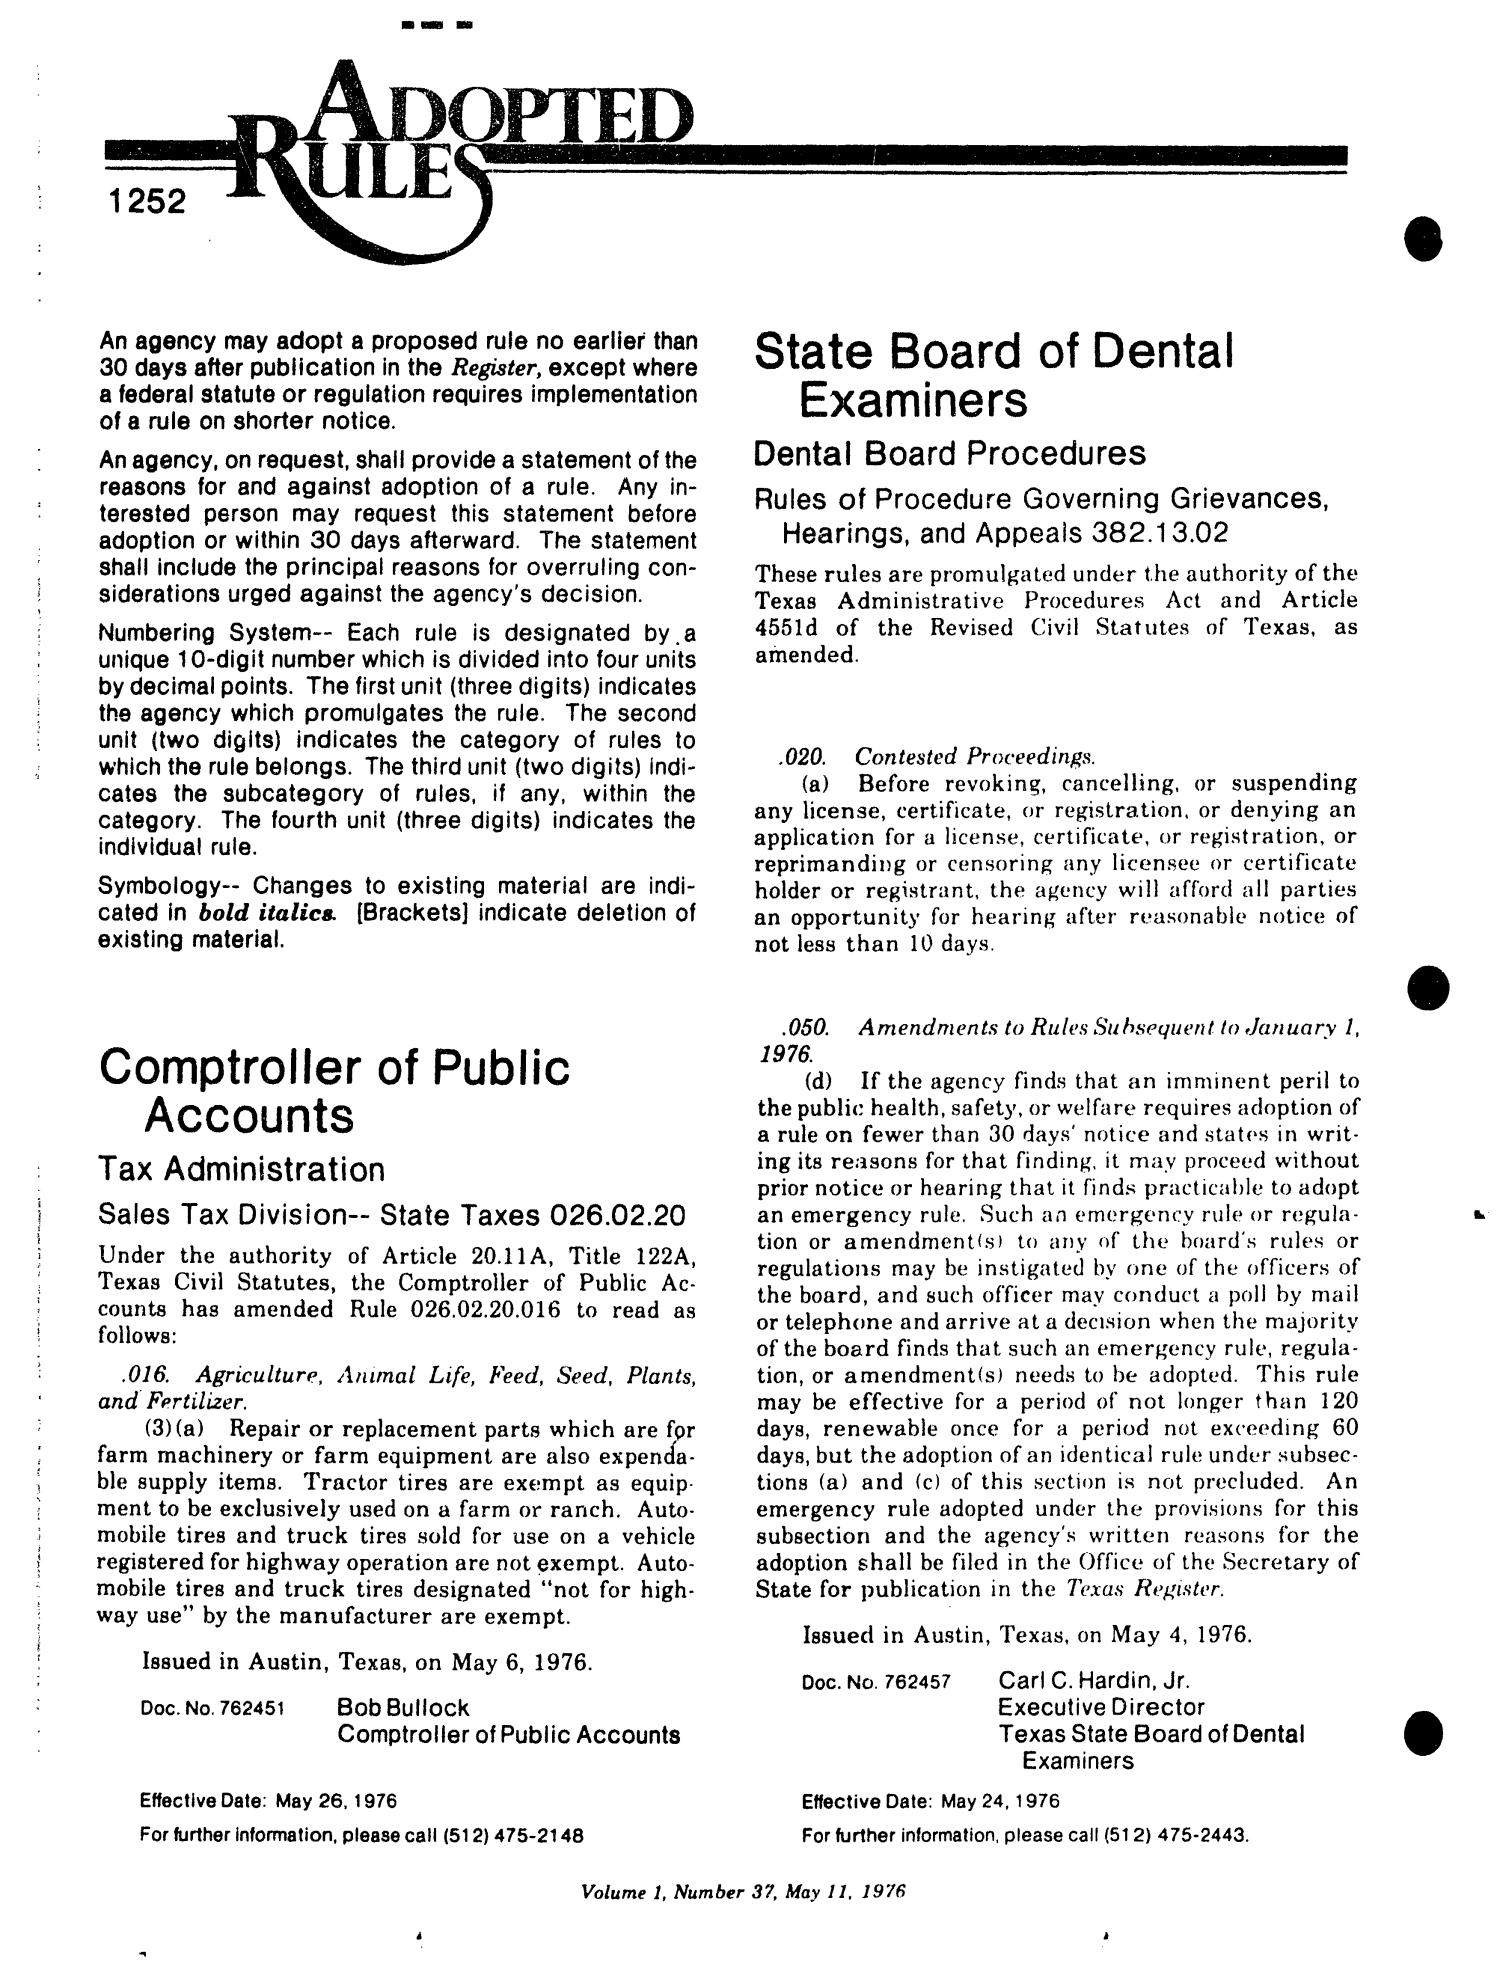 Texas Register, Volume 1, Number 37, Pages 1237-1276, May 11, 1976
                                                
                                                    1252
                                                